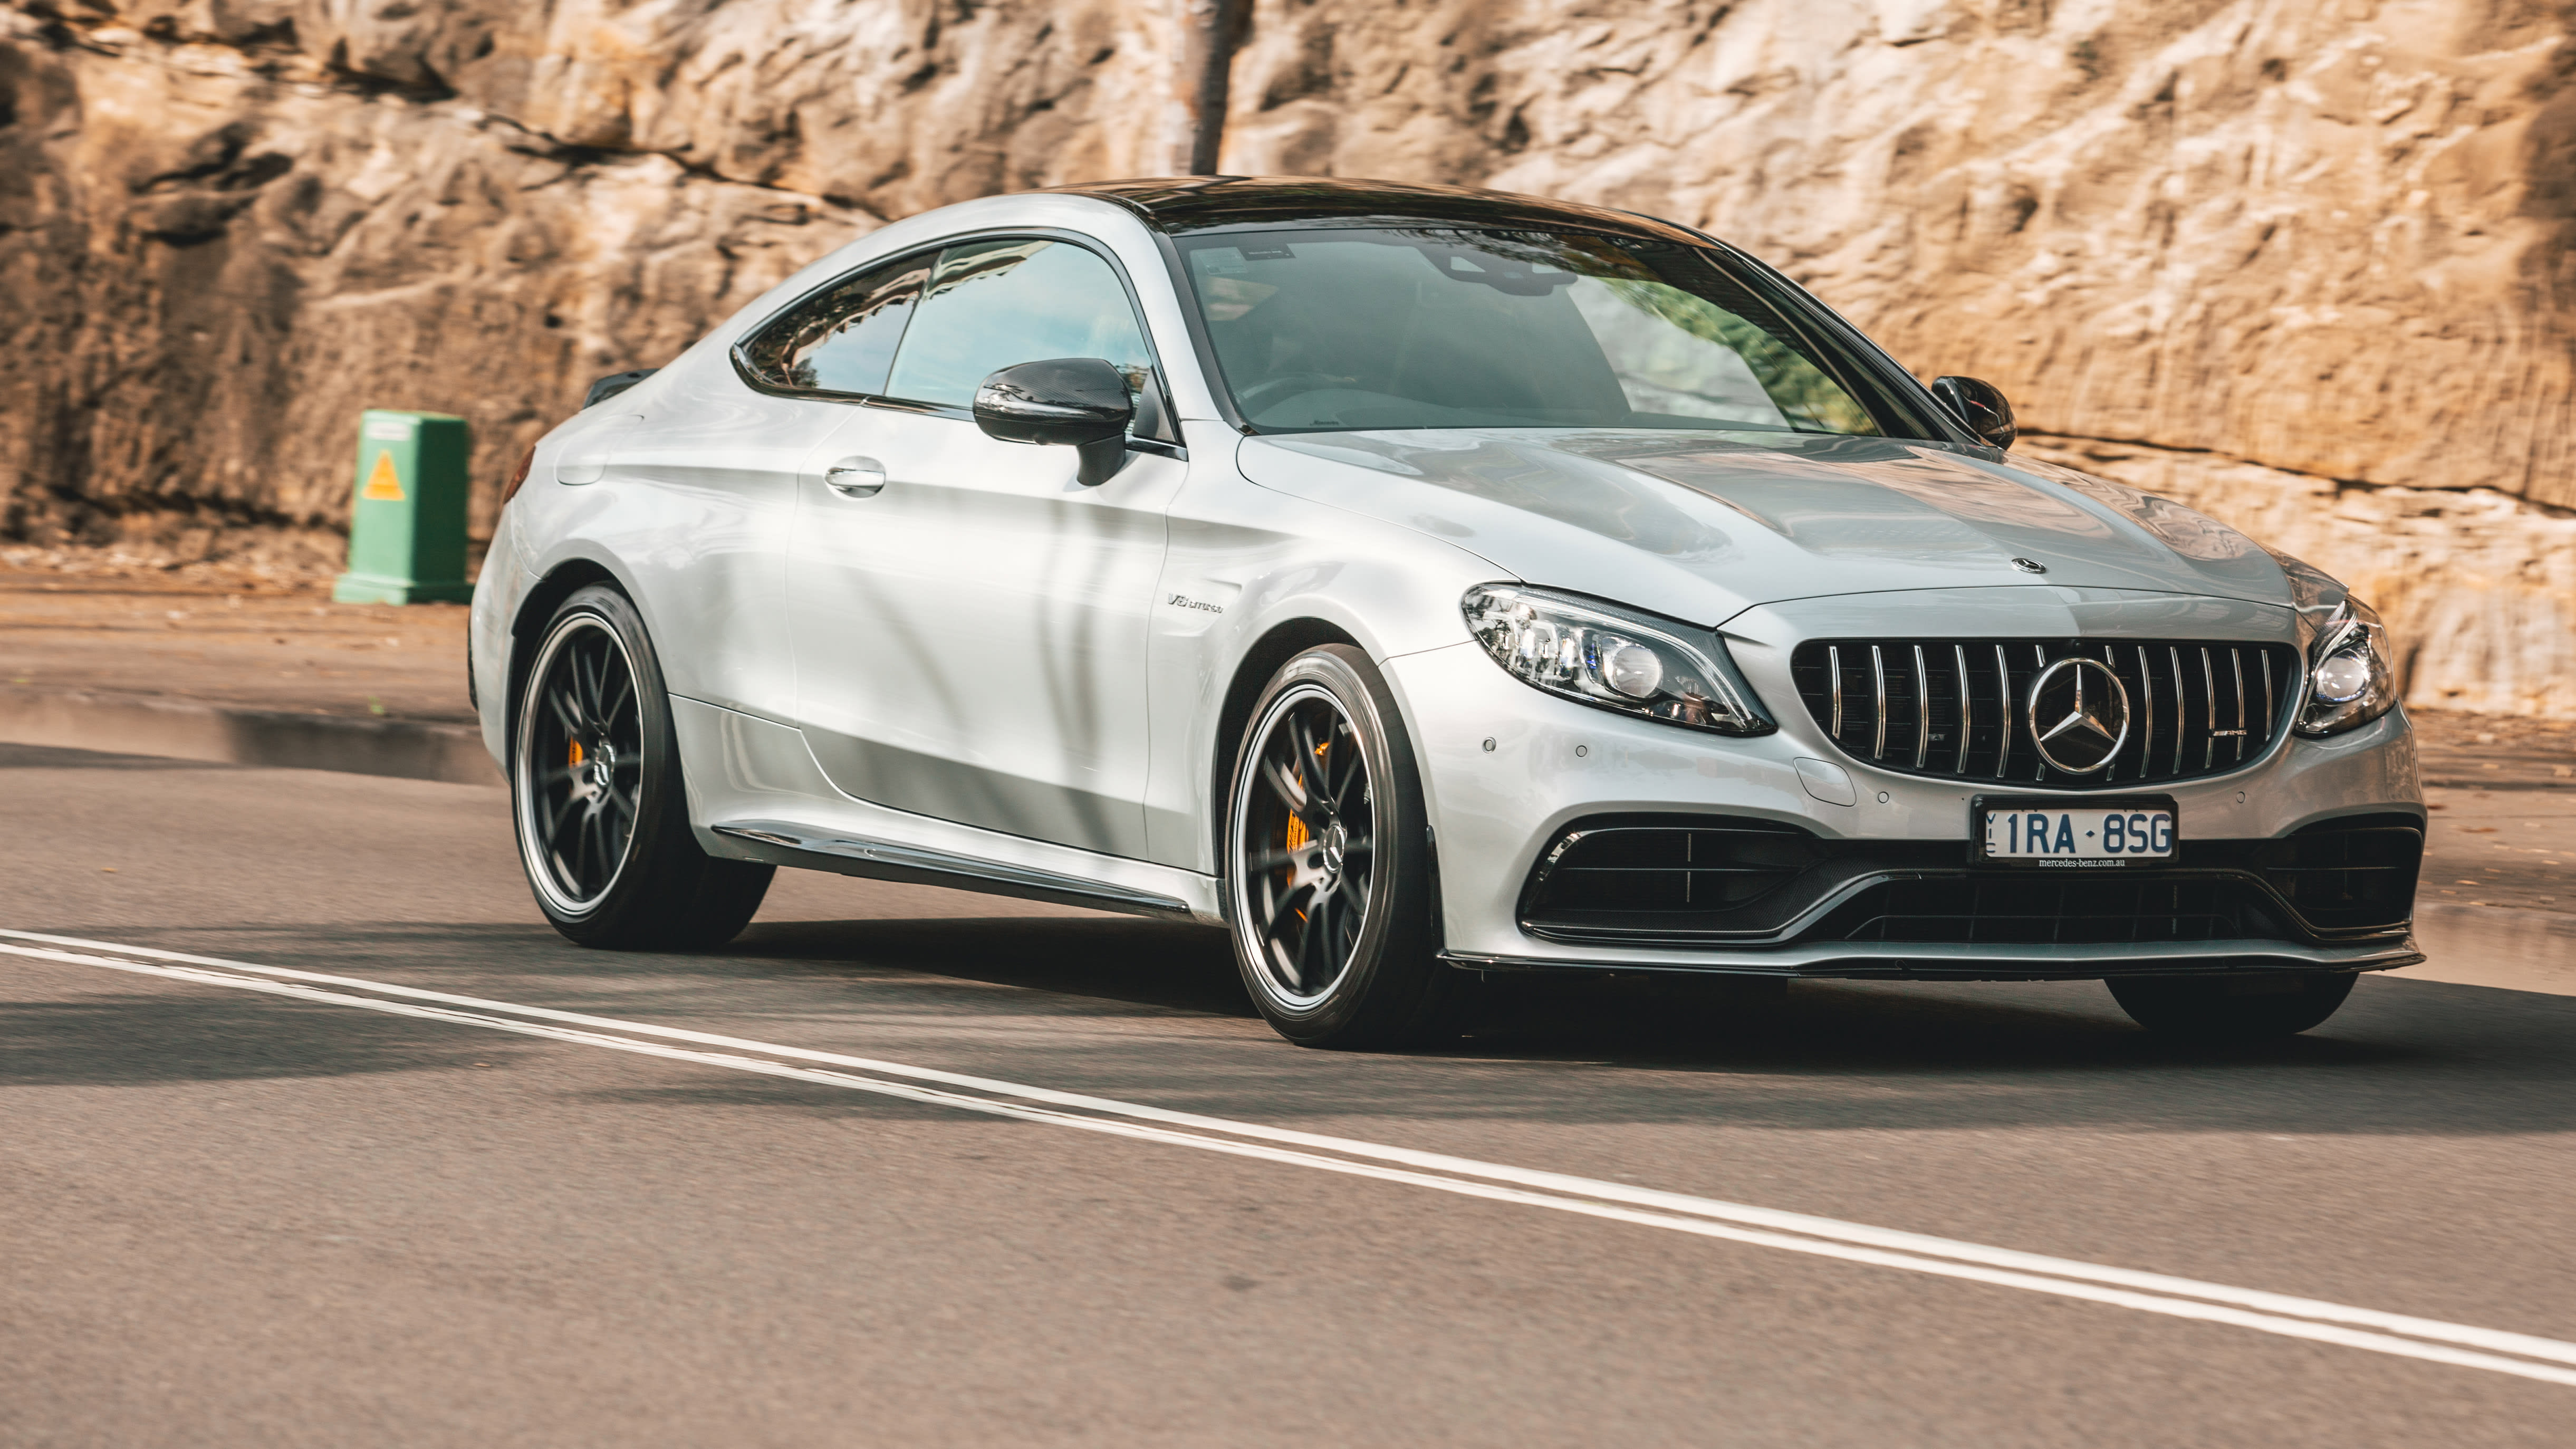 21 Mercedes Amg C63 S Coupe Aero Edition 63 Review Caradvice